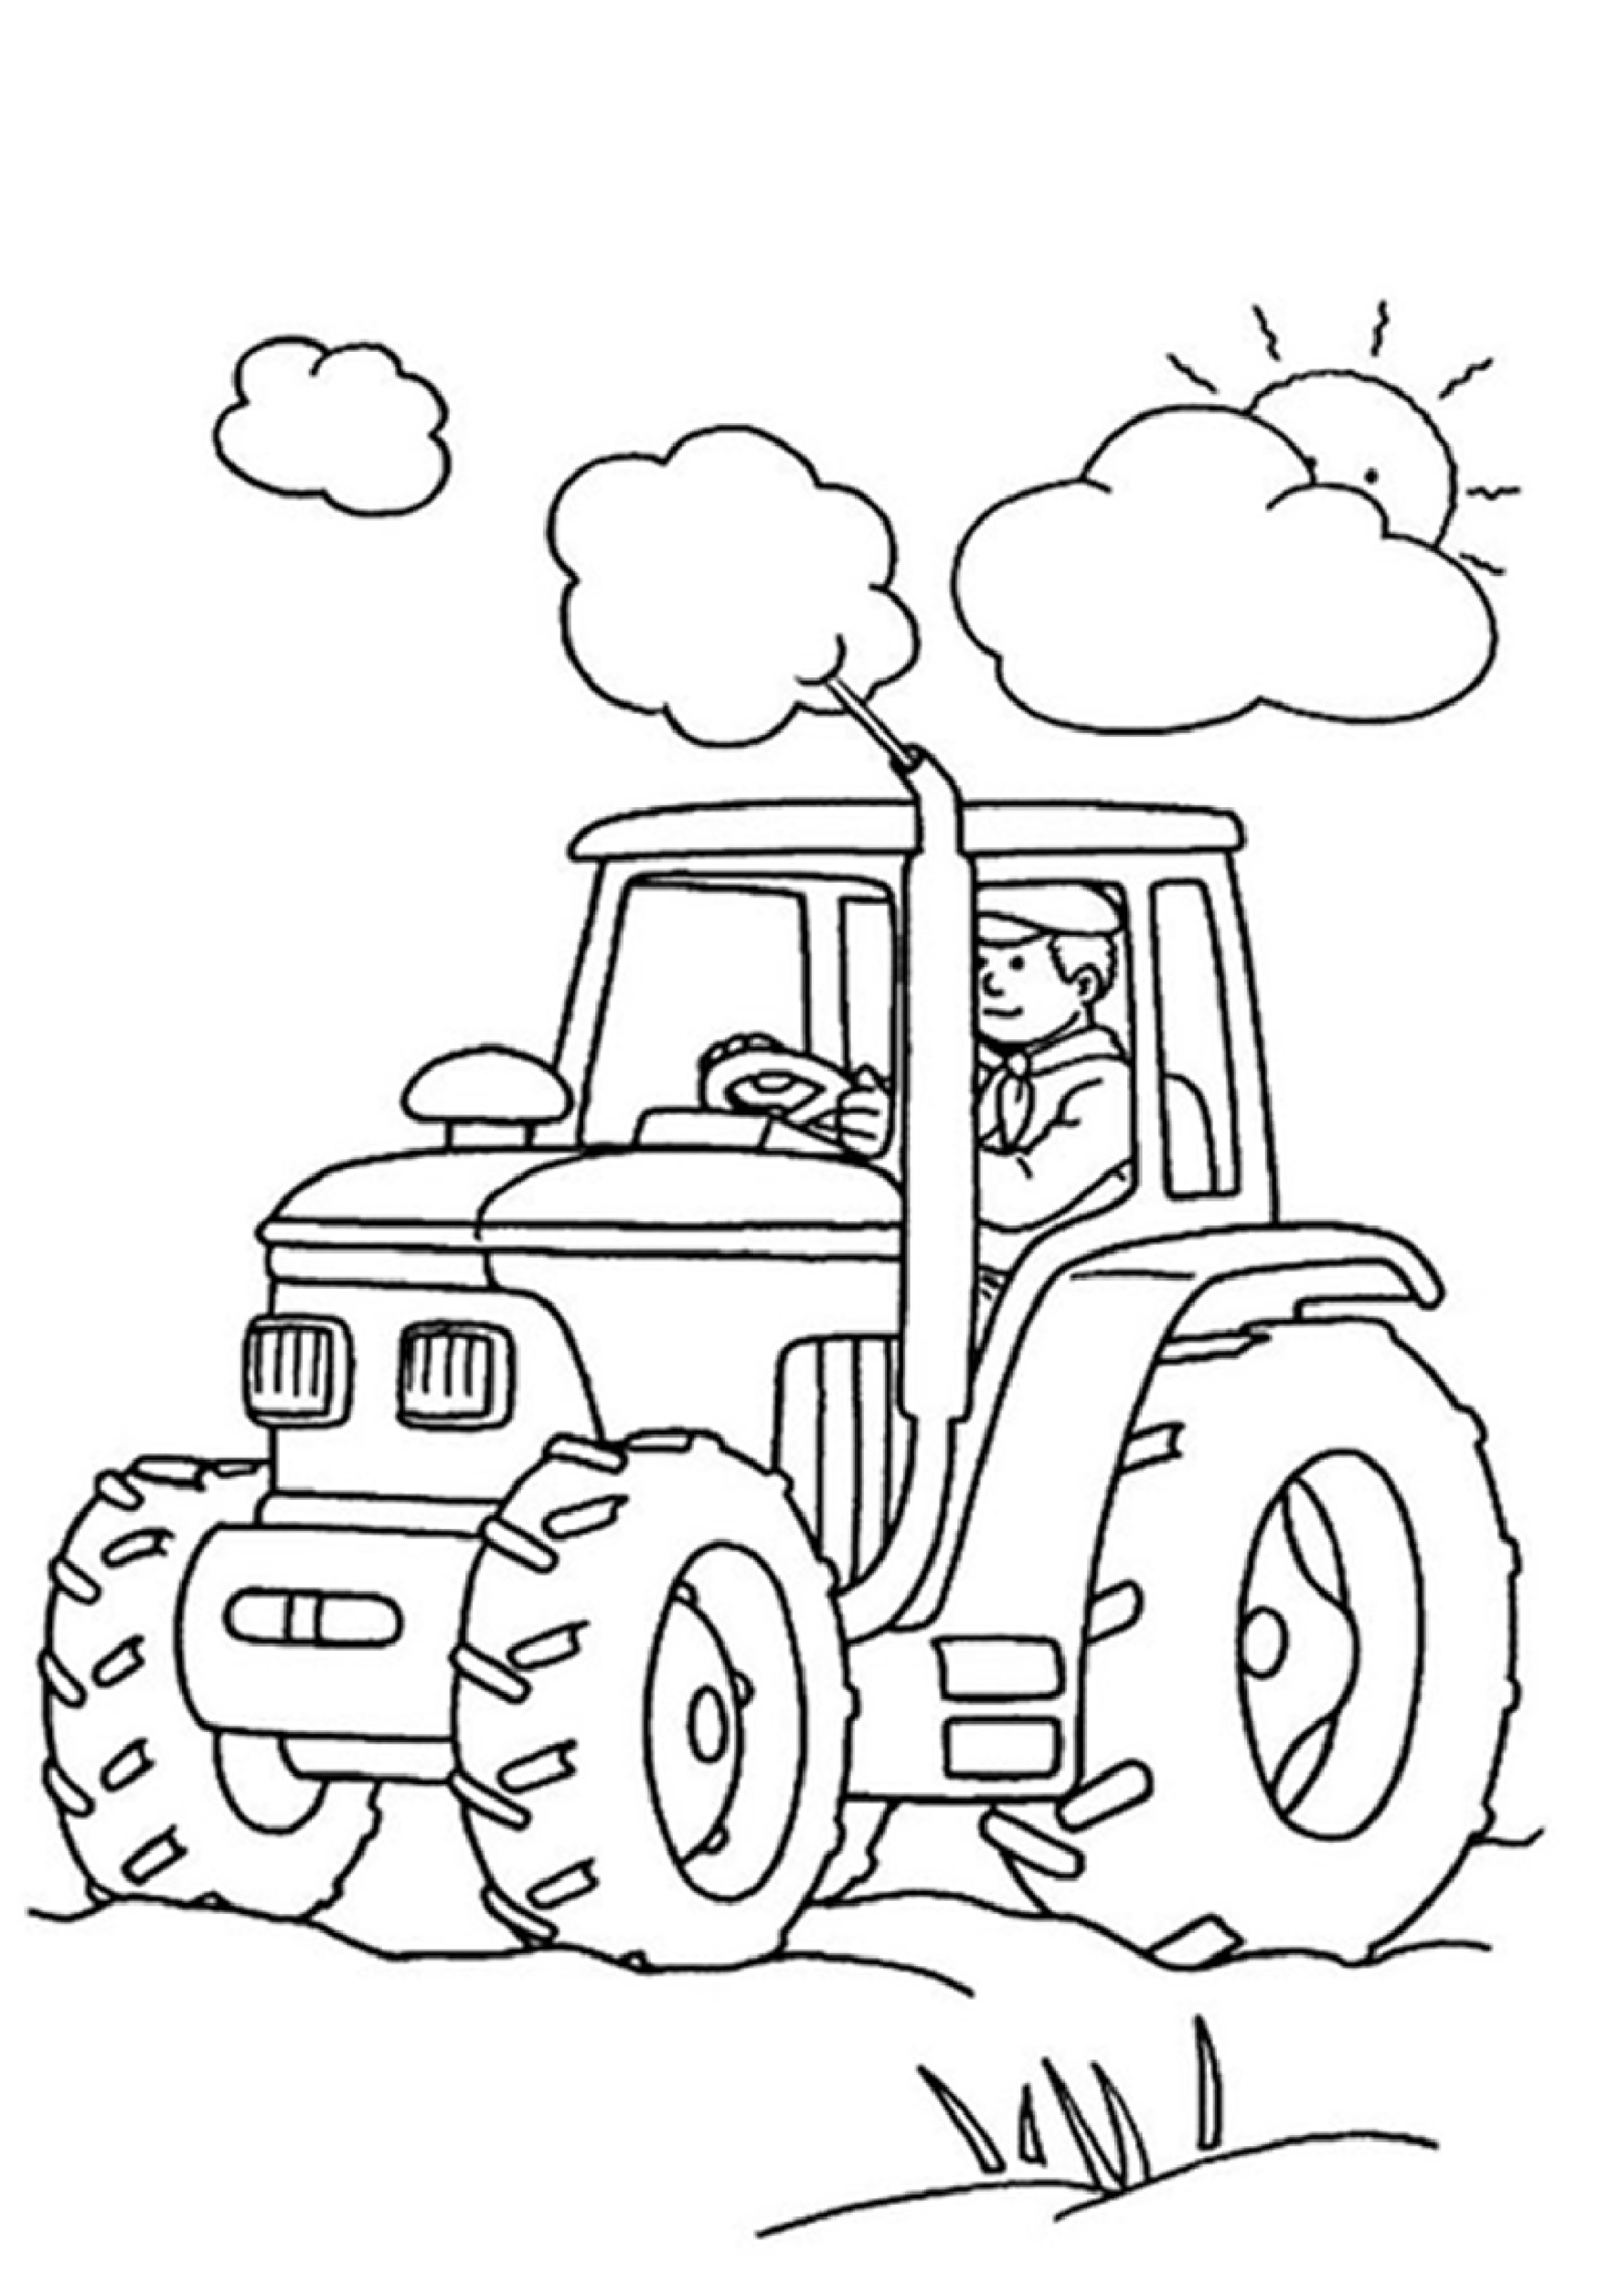 Printable Coloring Pages Boys
 Coloring pages for boys